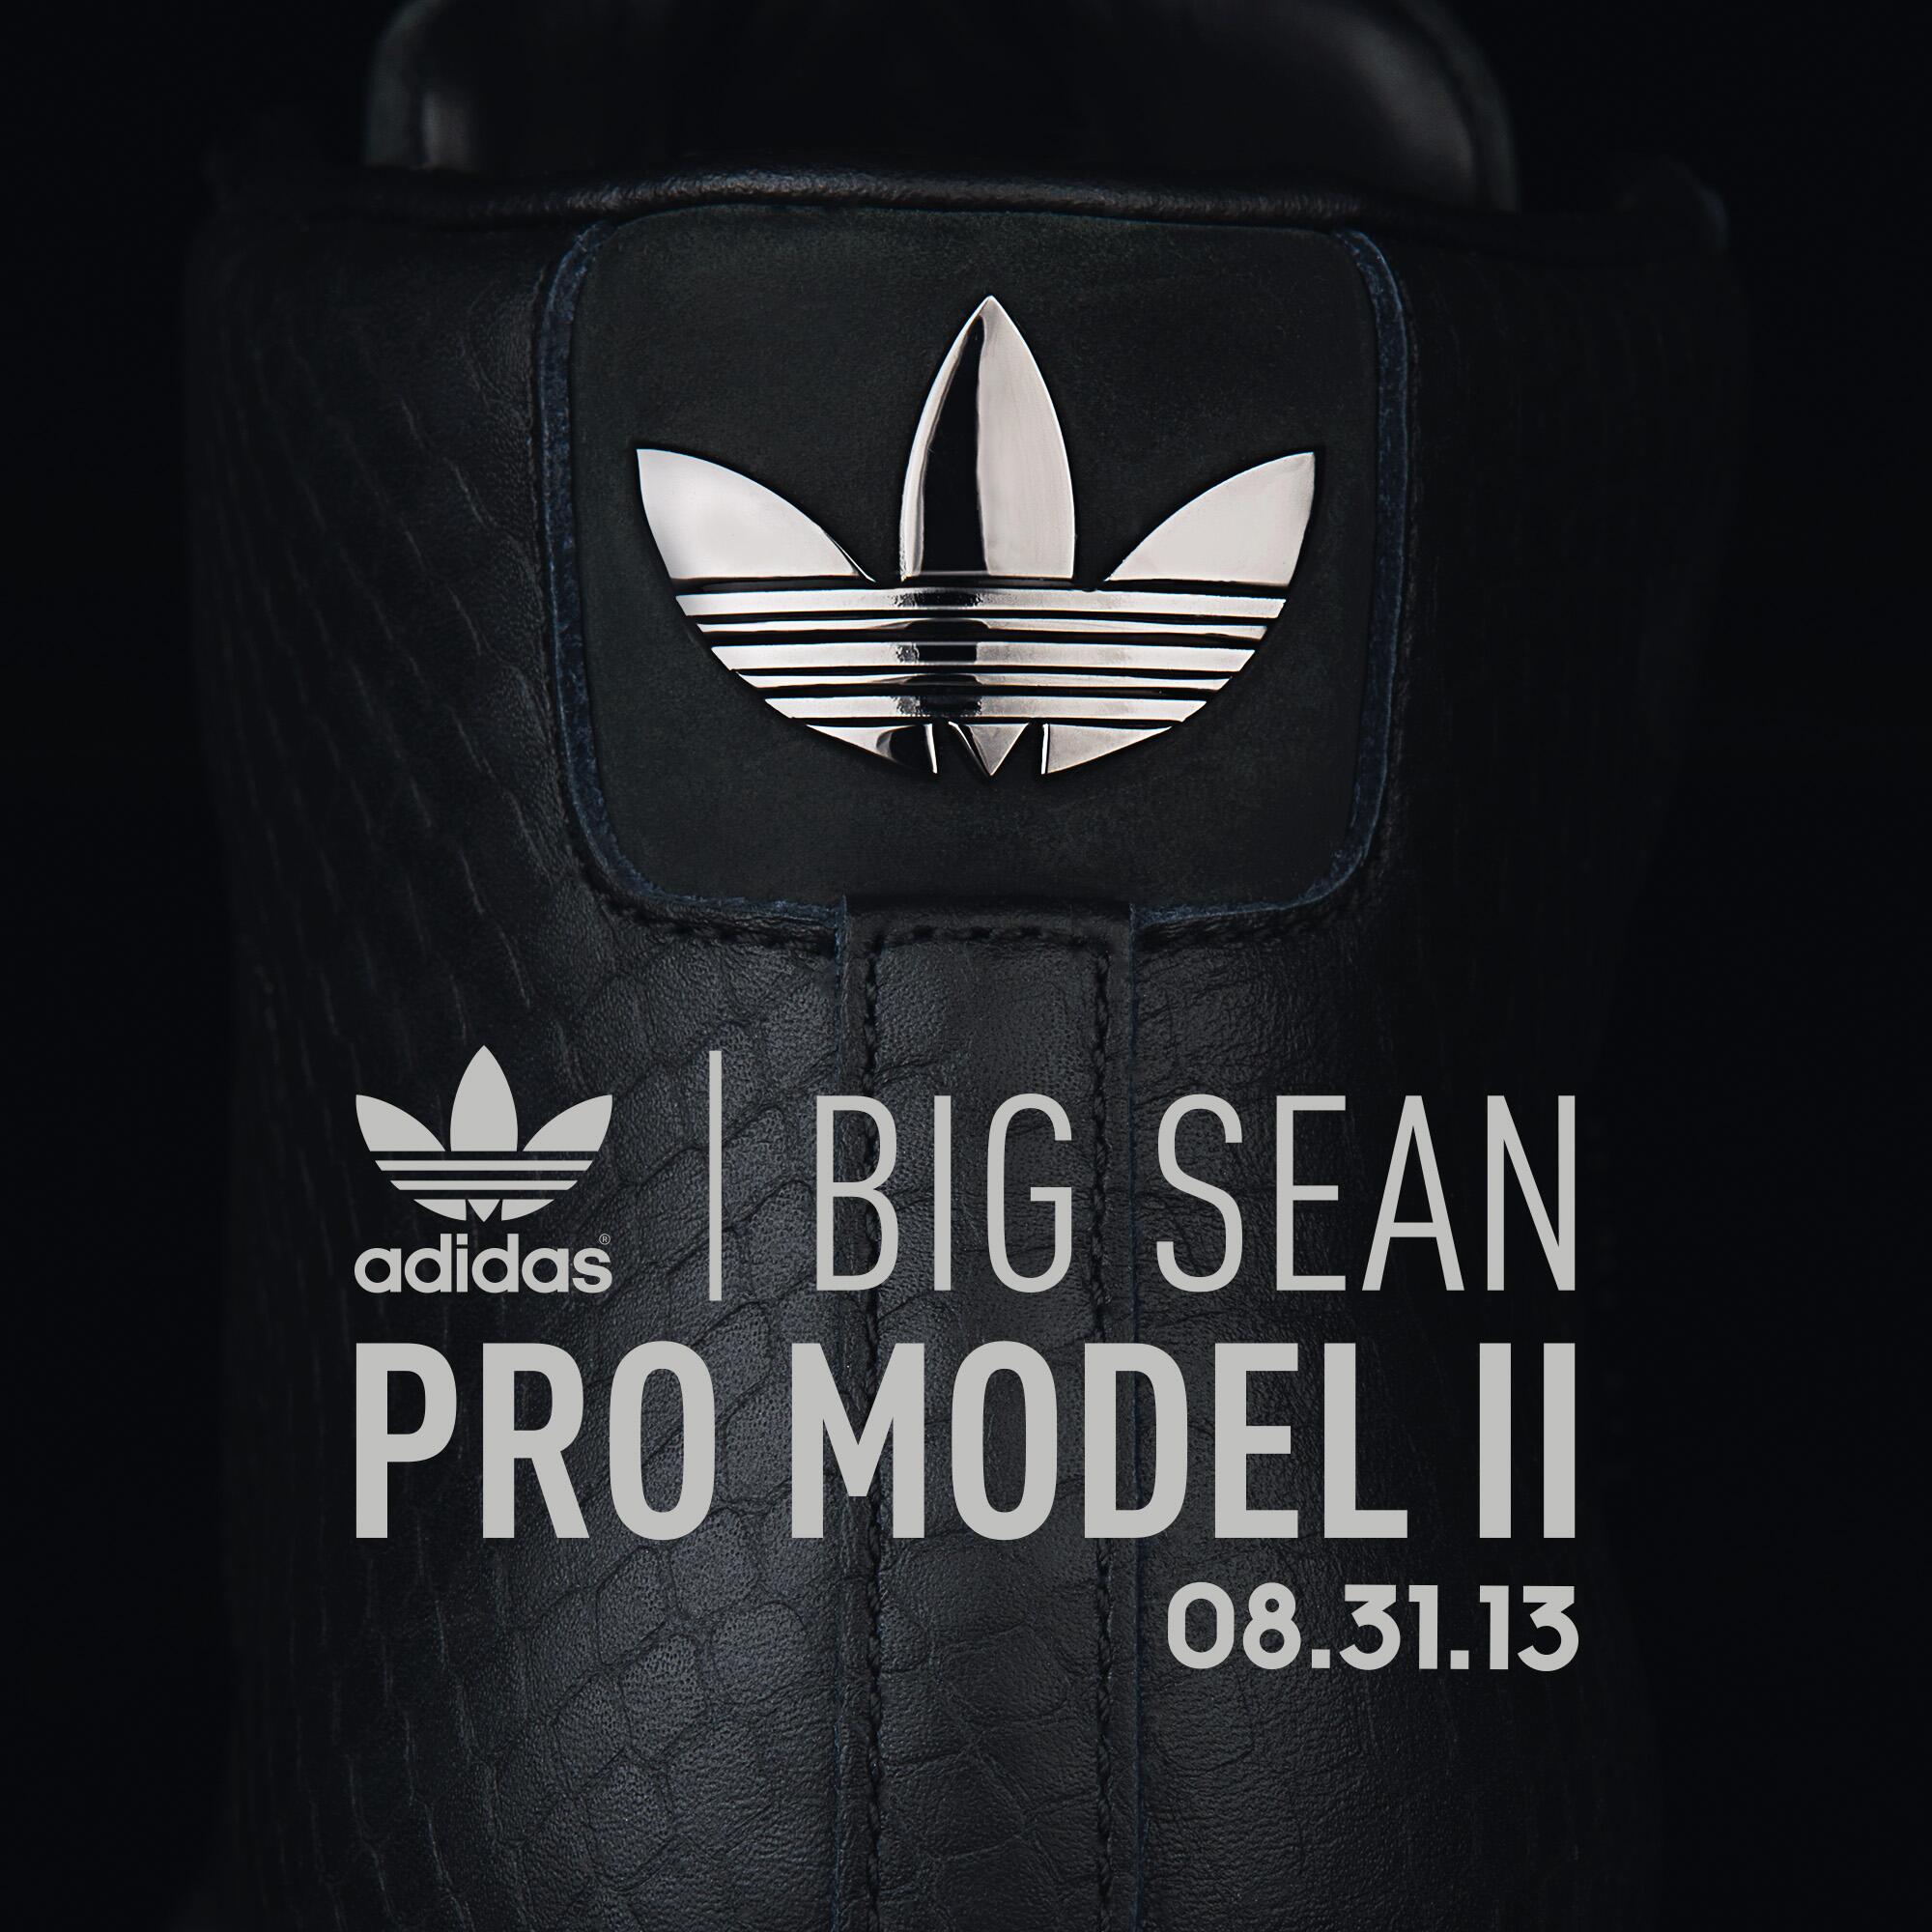 adidas Originals Twitter: "Coming soon to the US: A tribute to the Detroit 8.31.13 http://t.co/1PrrVz6ILv" / Twitter